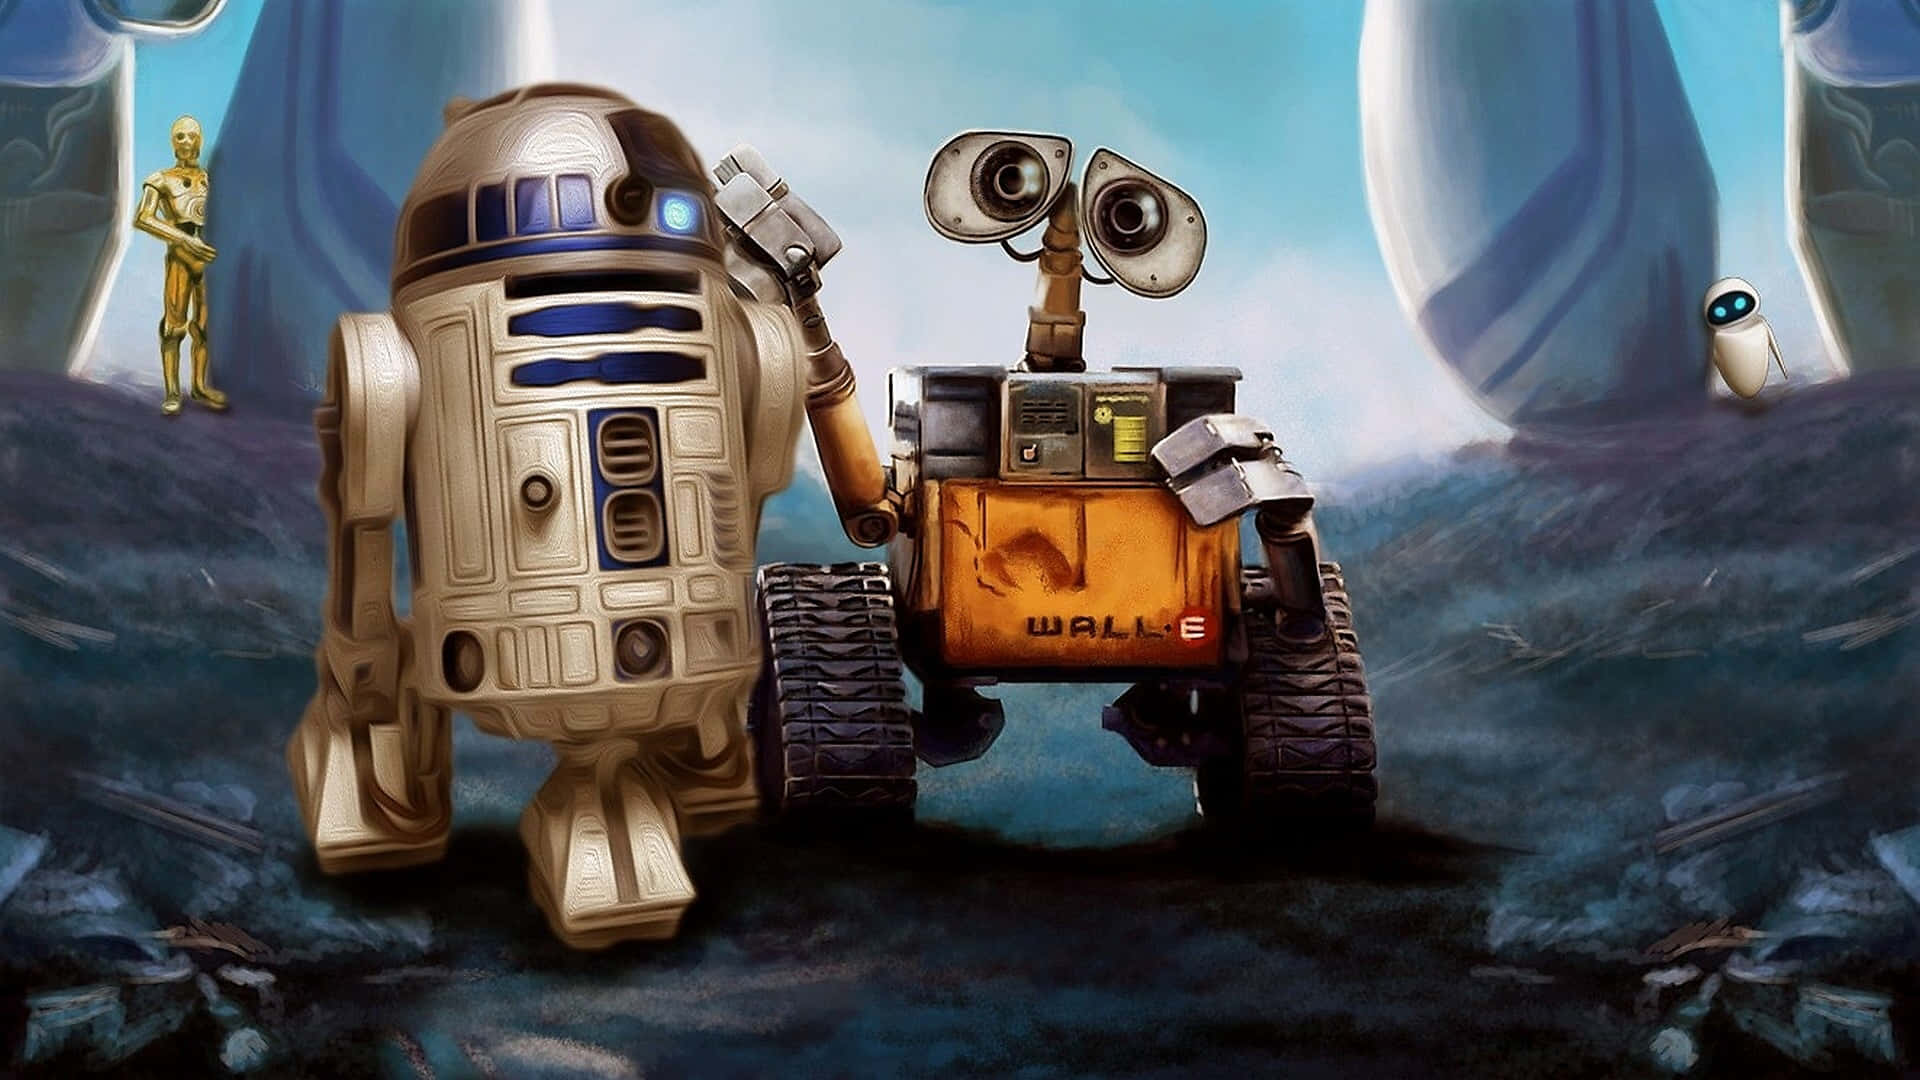 The Friendly and Helpful R2D2 Wallpaper